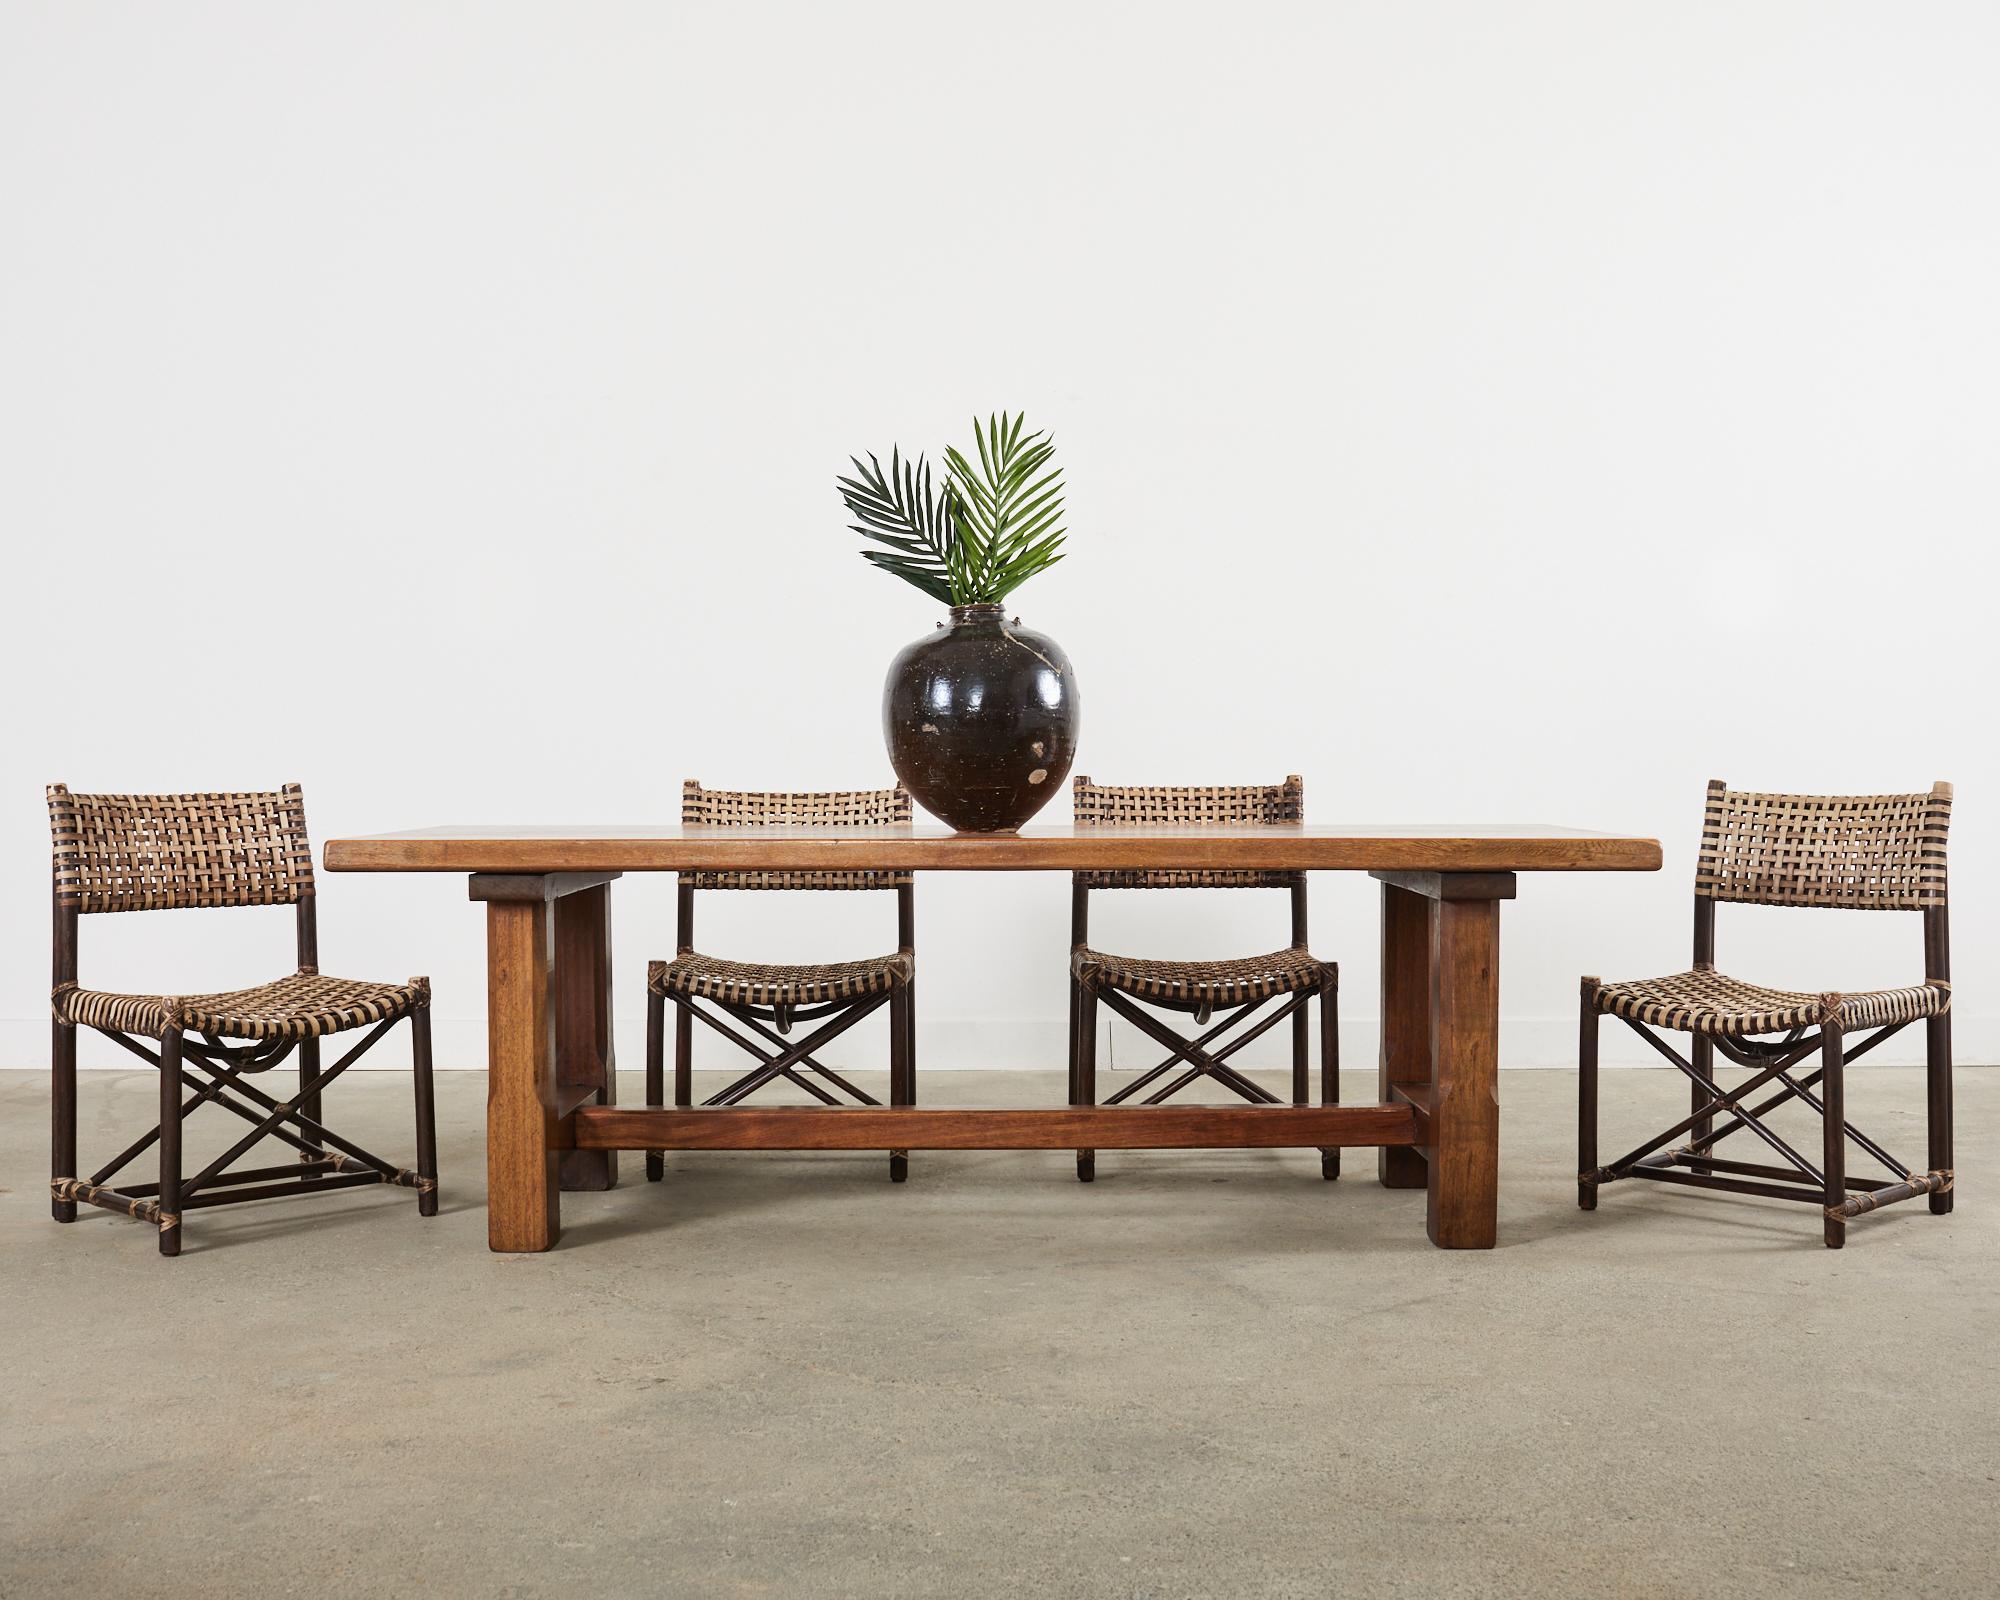 Iconic set of four laced rawhide rattan dining chairs made in the California coastal organic modern style by McGuire. The Antalya chair (model #MCLM44) features a rattan pole frame woven with leather rawhide laces. The frame has a directors chair